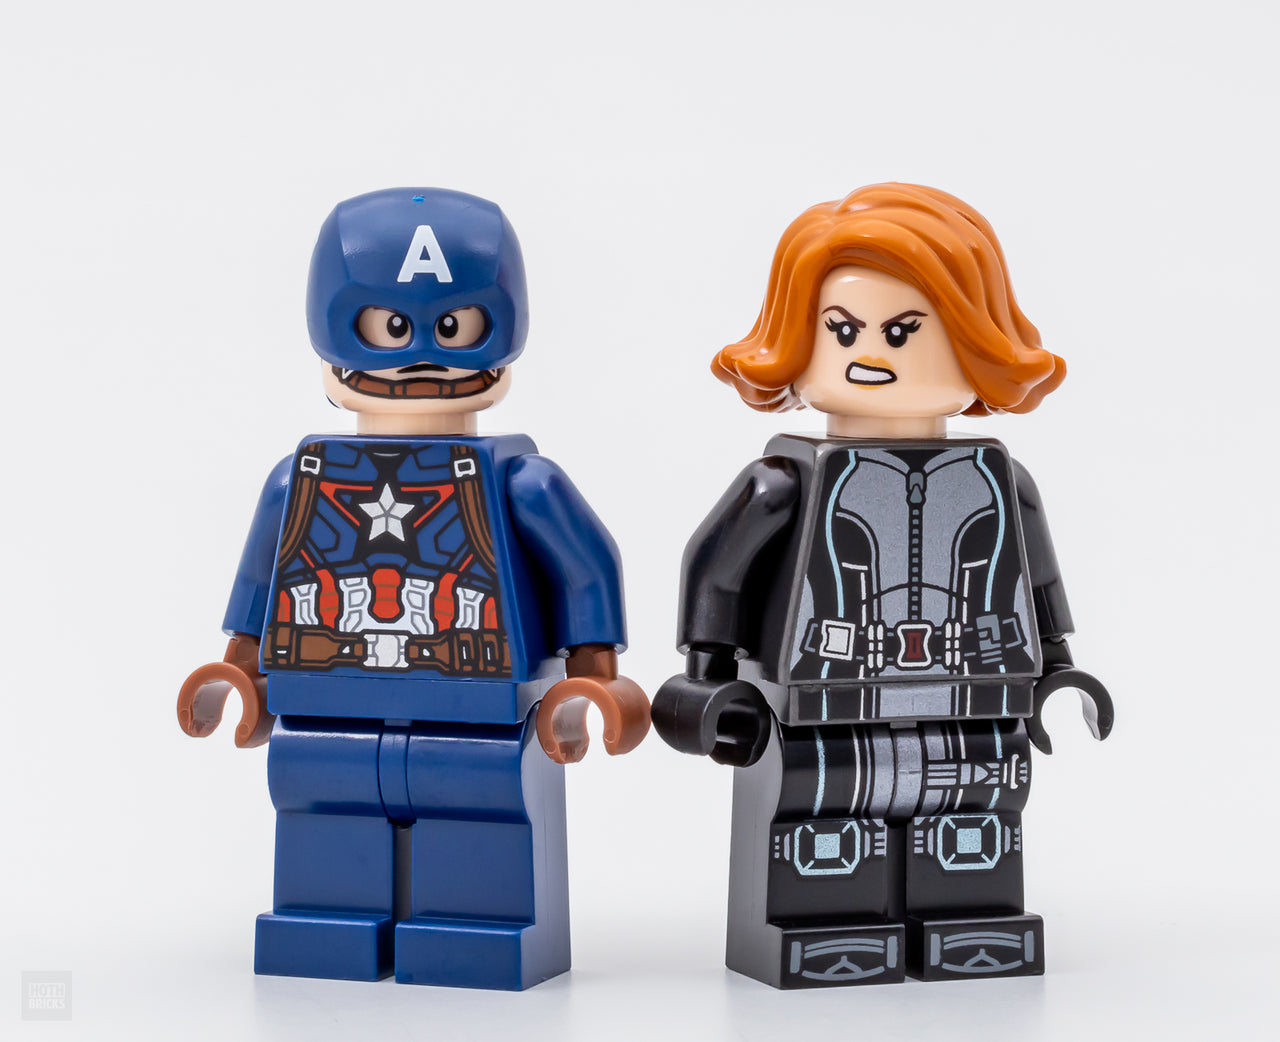 LEGO Marvel Black Widow & Captain America Motorcycles 76260 Buildable Marvel Toy Master Kids Company LEGO 